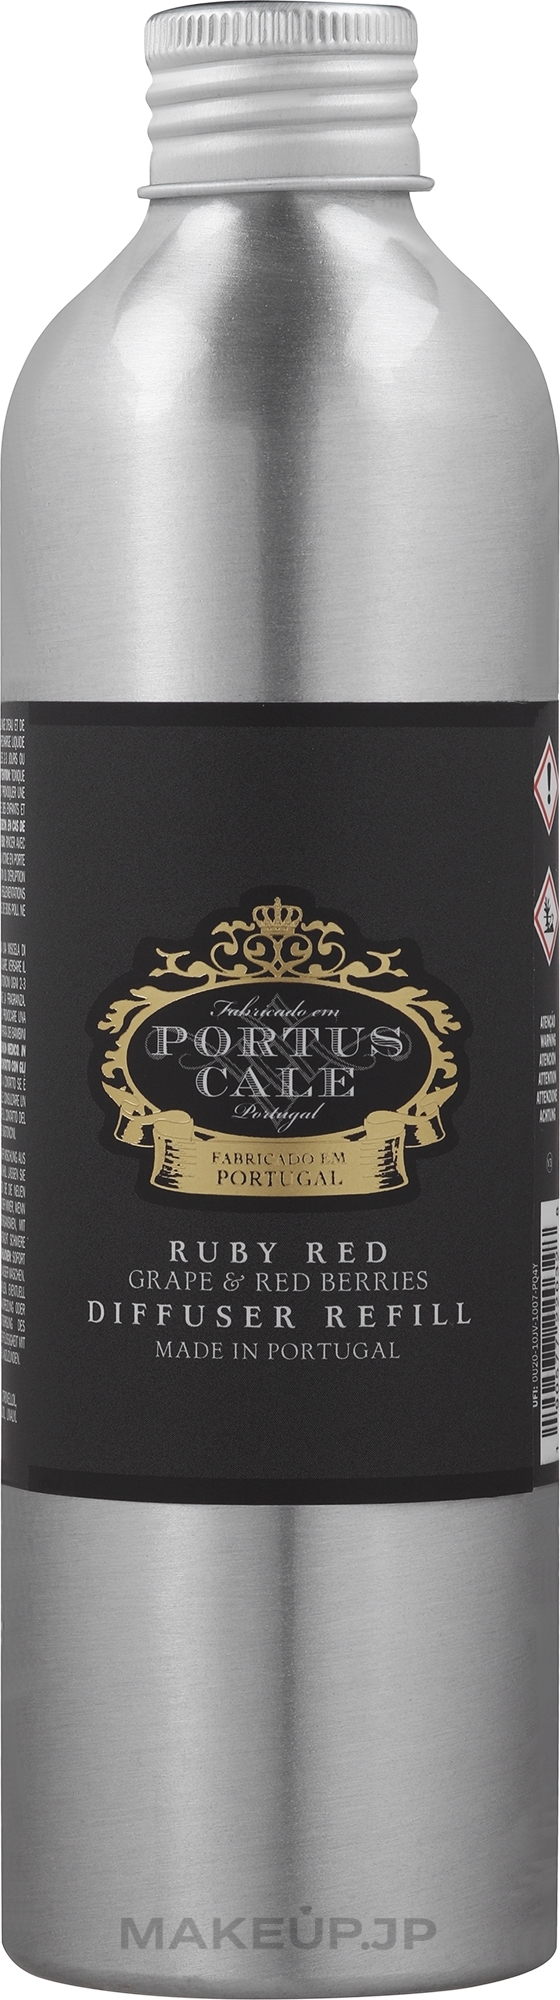 Reed Diffuser - Portus Cale Ruby Red Diffuser (refill)  — photo 250 ml